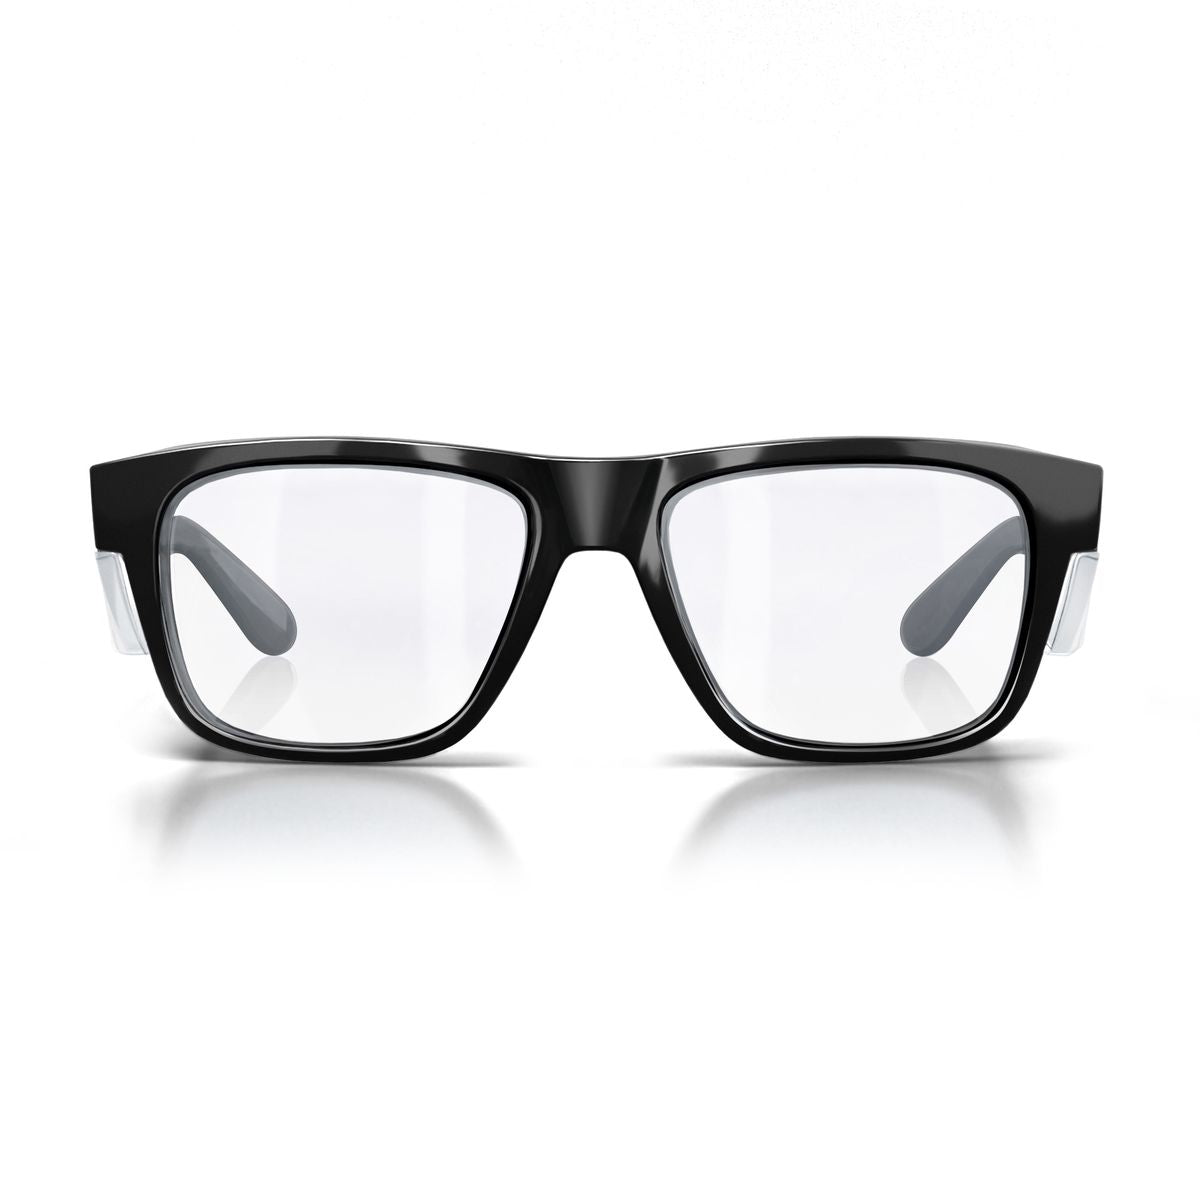 SafeStyle Fusions Black Frame/Clear Lens